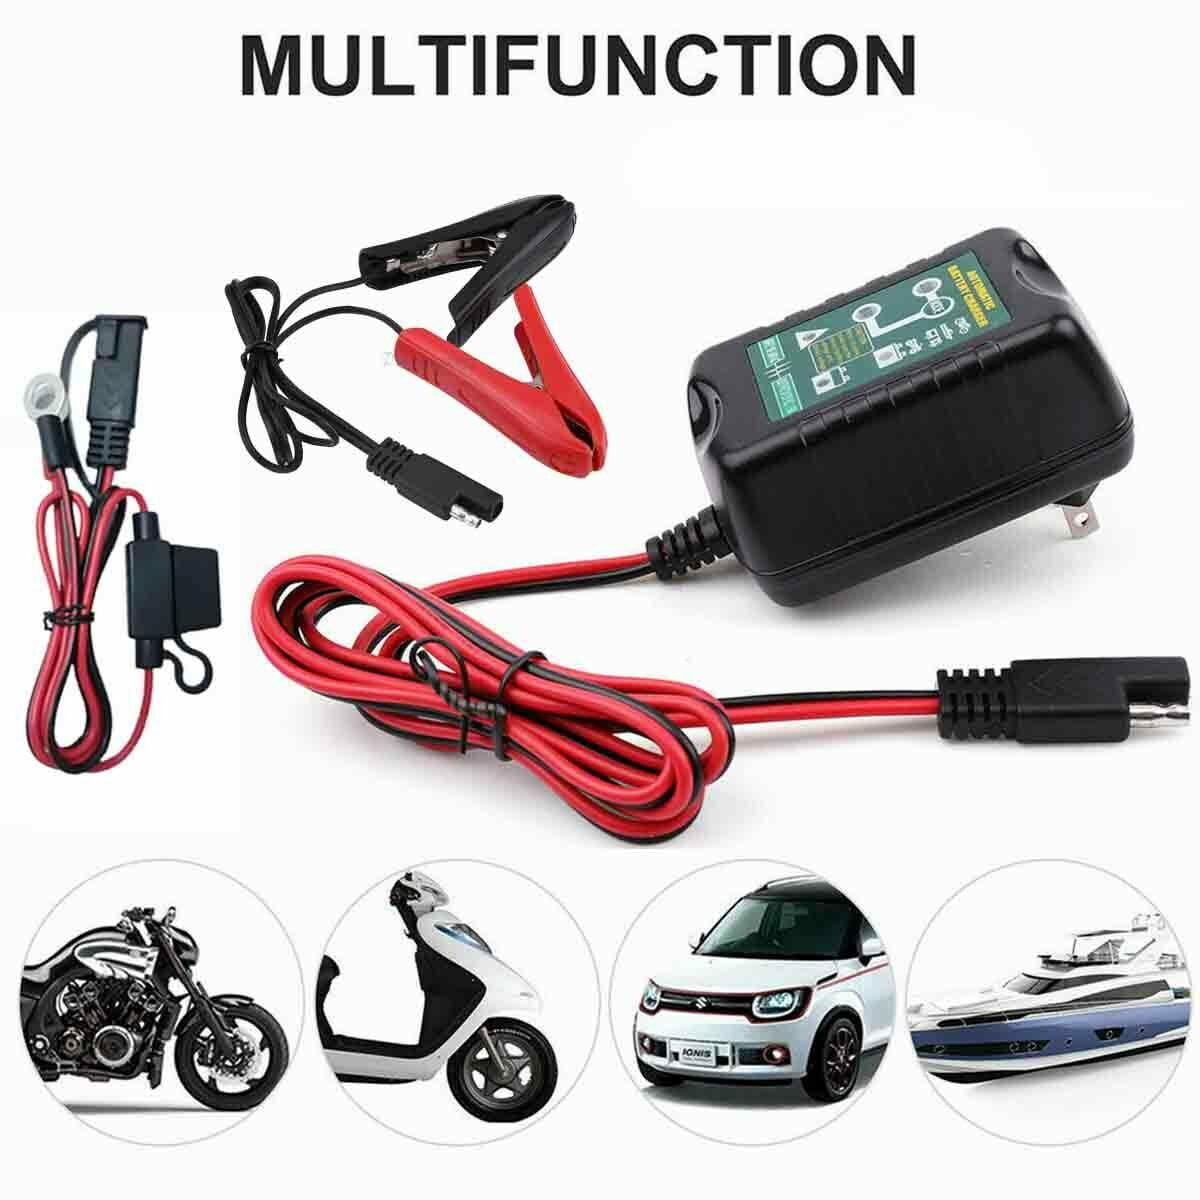 Portable 12V Auto Car Battery Charger Tender Trickle Maintainer Boat Motorcycle 